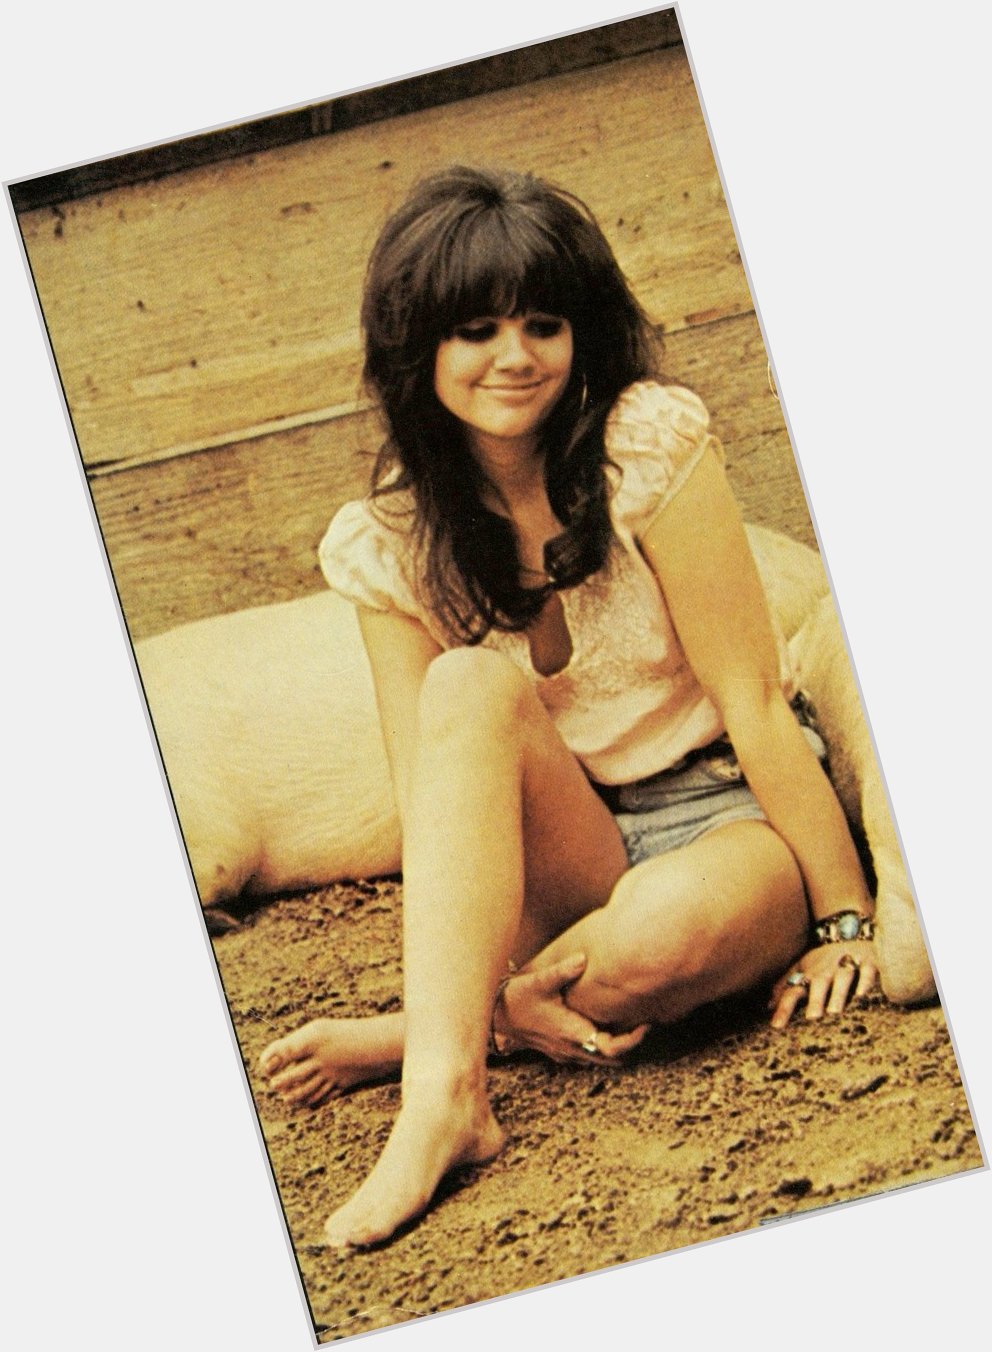 Happy birthday Linda Ronstadt. Fell in love with her when I saw this pic in Circus Magazine. 